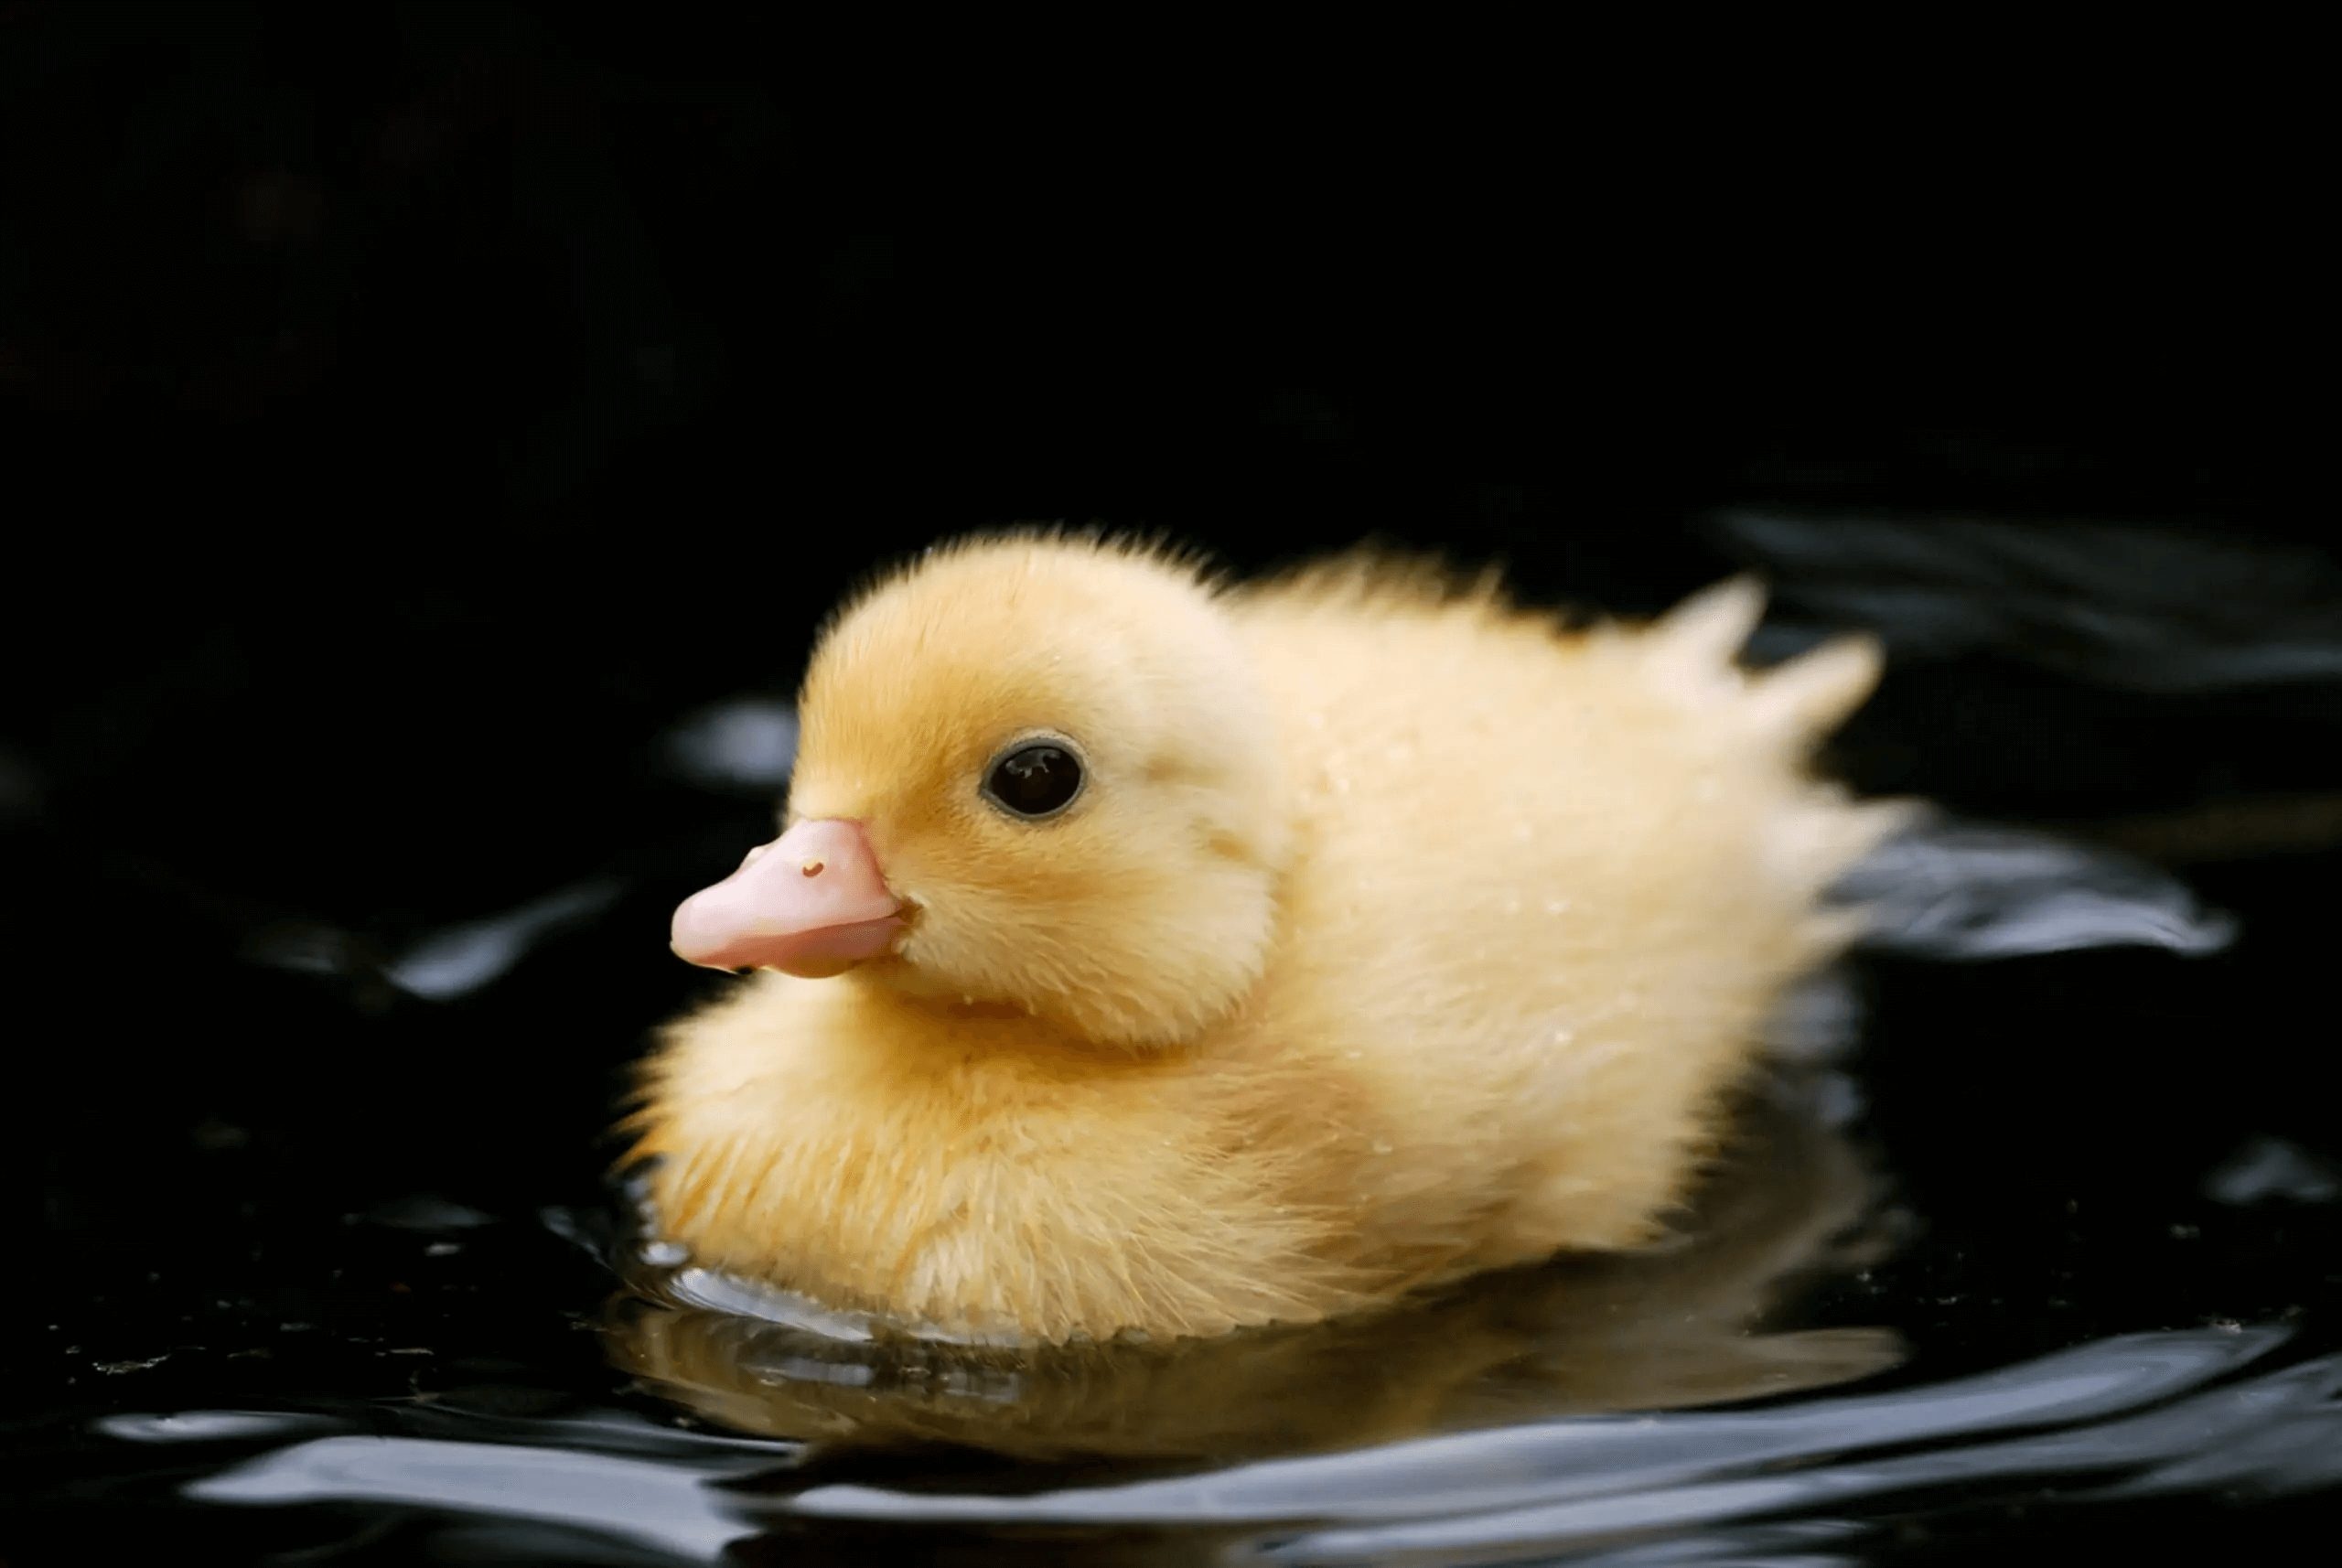 Caring for ducklings, Organic nourishment, Nature's best, Healthy growth, 2560x1720 HD Desktop